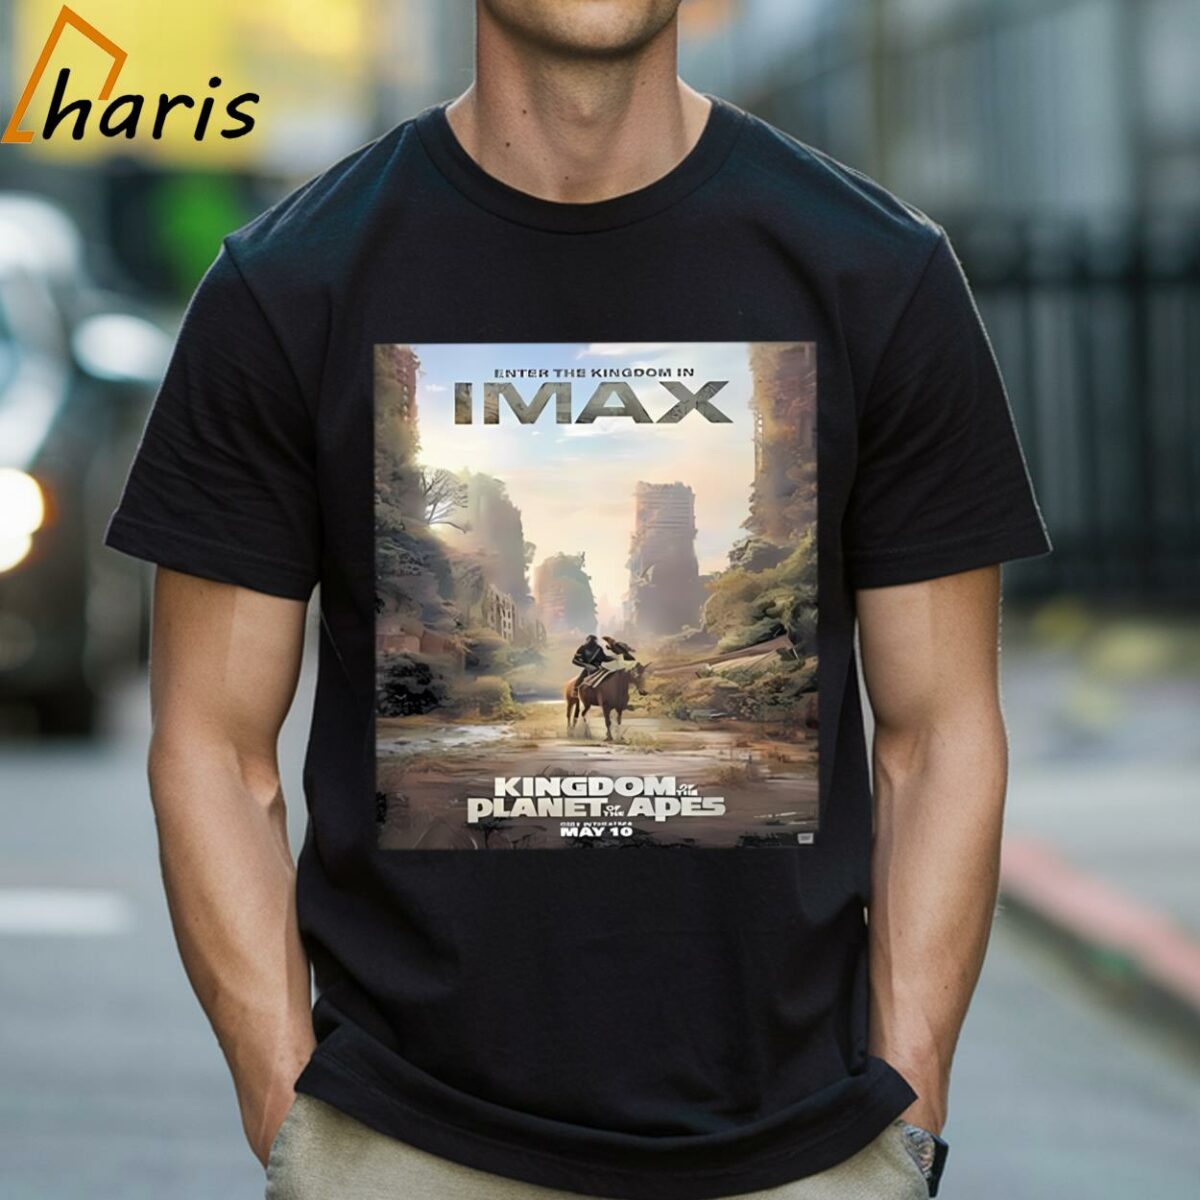 Enter The Kingdom In Imax Kingdom Of The Planet Of The Apes Shirt 1 Shirt